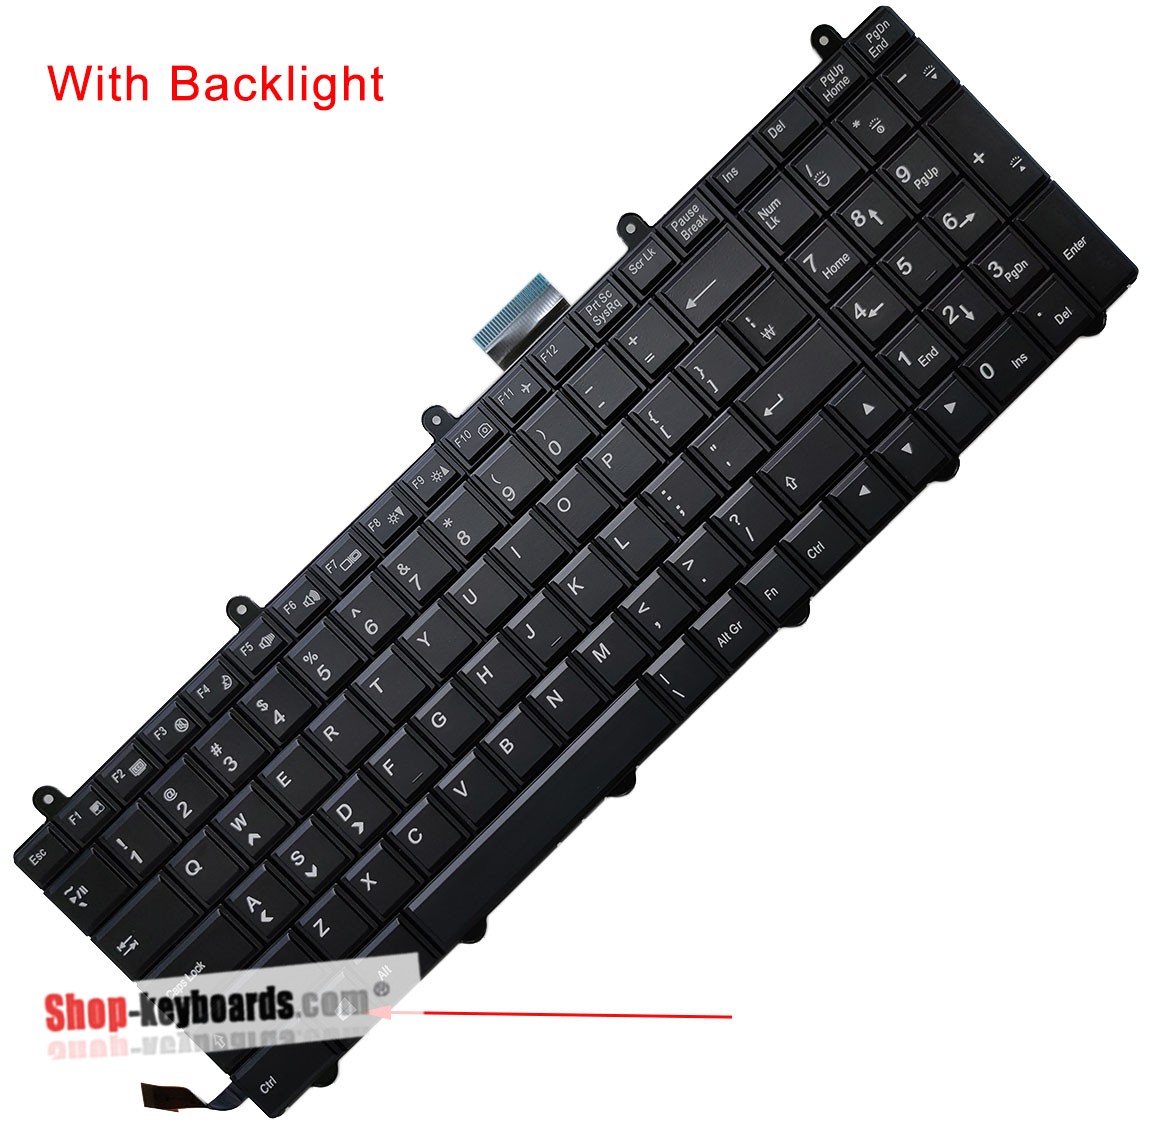 AVELL G1540 FIRE V2 Keyboard replacement